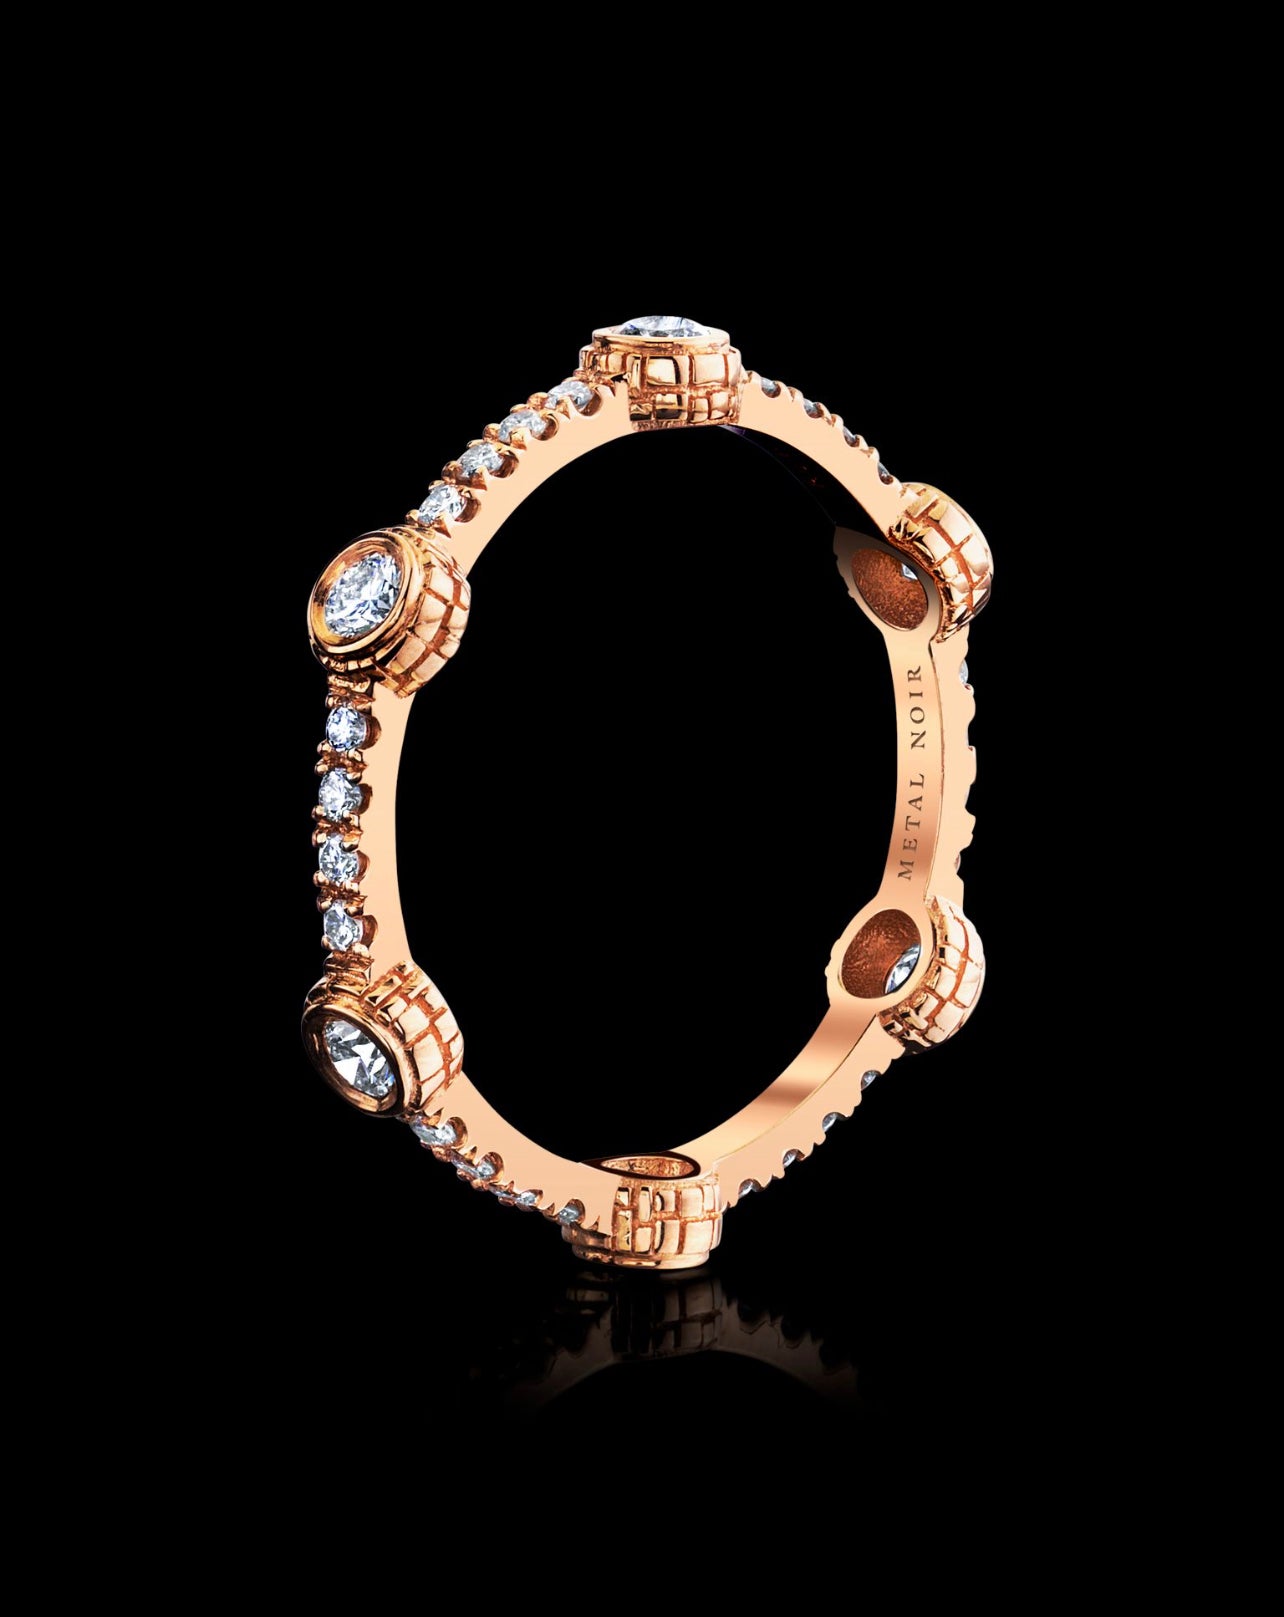 Ultra Thin Collection ‘SIX’ Eternity Diamond Ring with 5 Pointer round diamonds